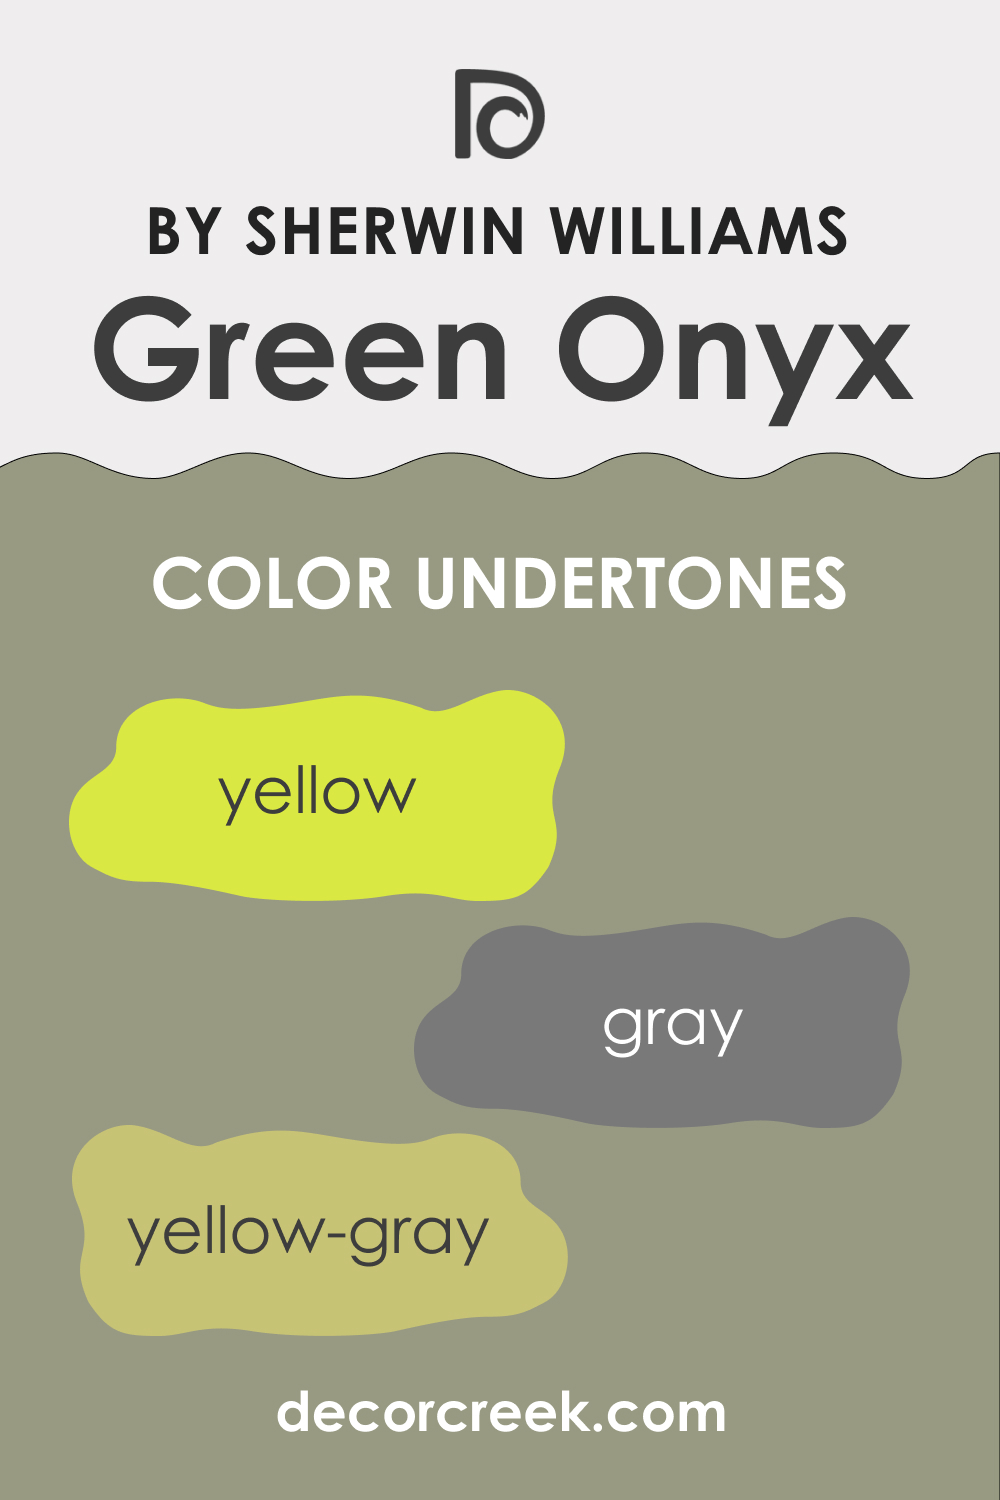 What Undertones Does Green Onyx SW 9128 Have?